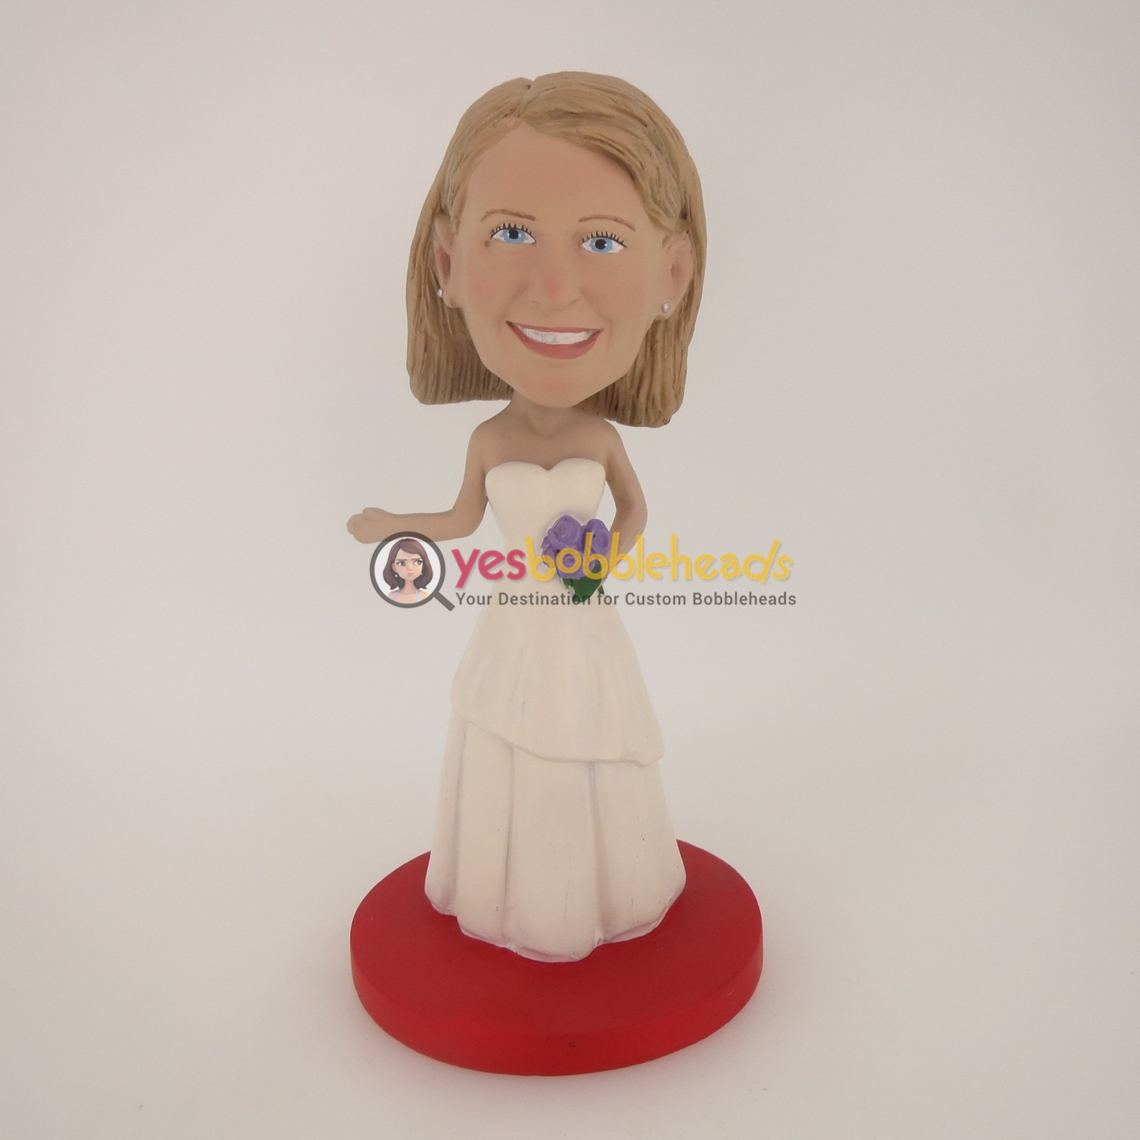 Picture of Custom Bobblehead Doll: Woman with White Wedding Dress